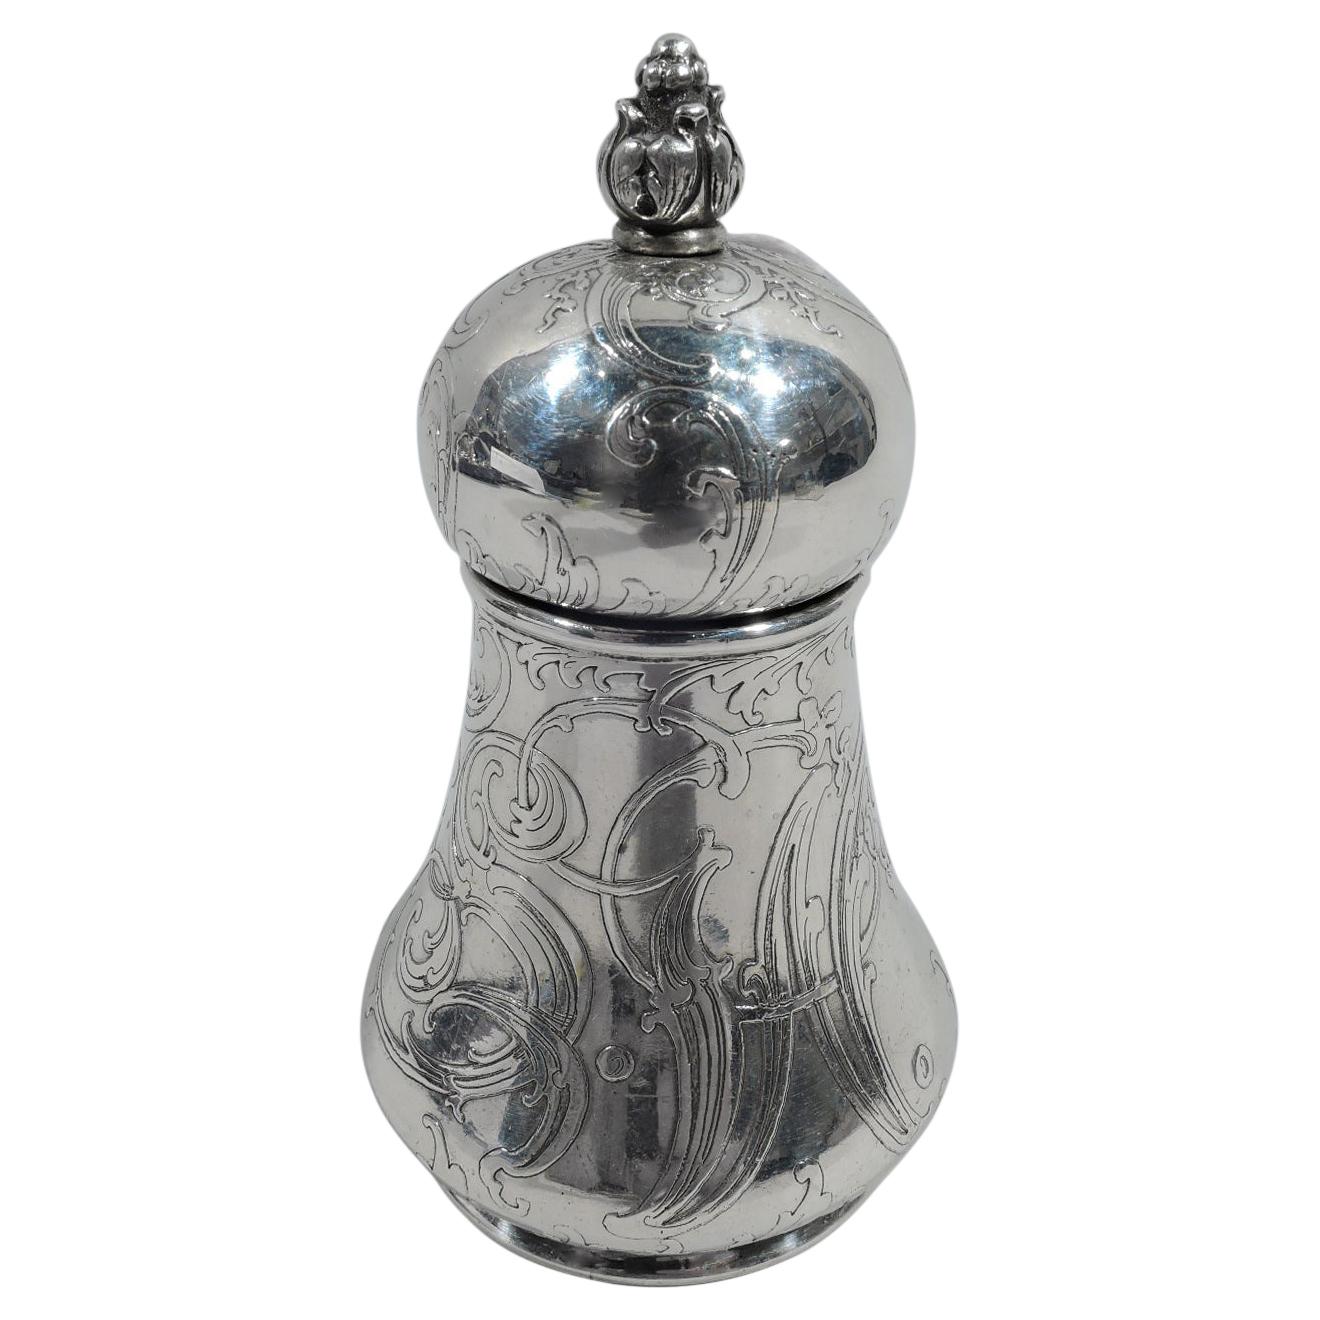 Gorgeous Tiffany & Co. American Art Nouveau Sterling Silver Pepper Mill